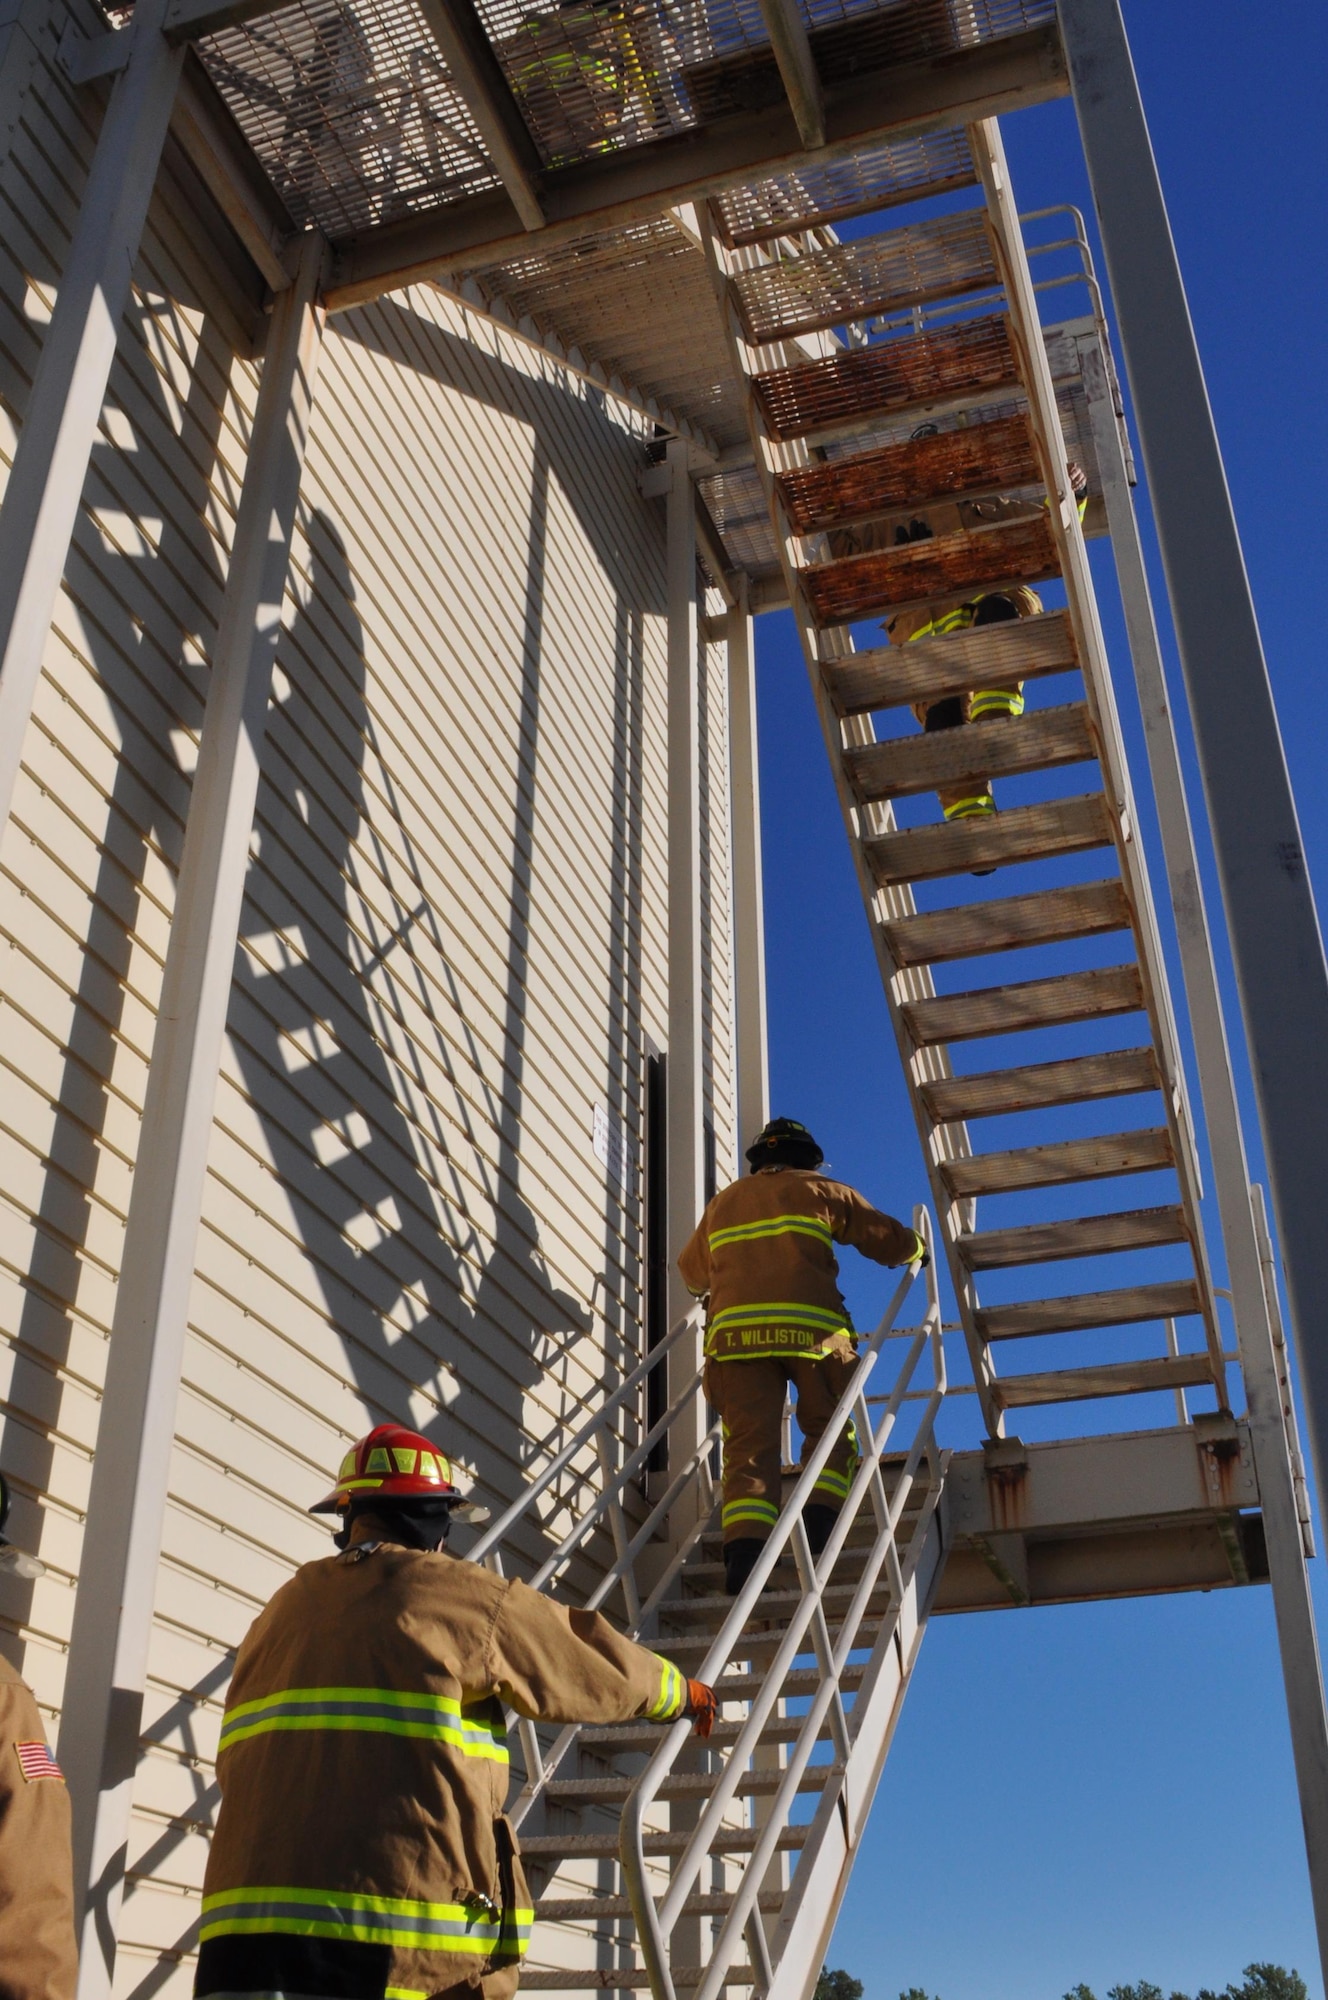 Okie firefighters from the 507th Civil Engineer Squadron honor the fallen with their 7th annual fire climb Sept. 11, 2016, at Tinker Air Force Base, Okla. To remember the victims and heroes who perished on that day, 15 years ago, Reservists climb up and down the fire-training tower to complete the 18 laps within 56 minutes, the amount of time it took the South Tower of the World Trade Center to collapse. (U.S. Air Force photo/Master Sgt. Grady Epperly)
